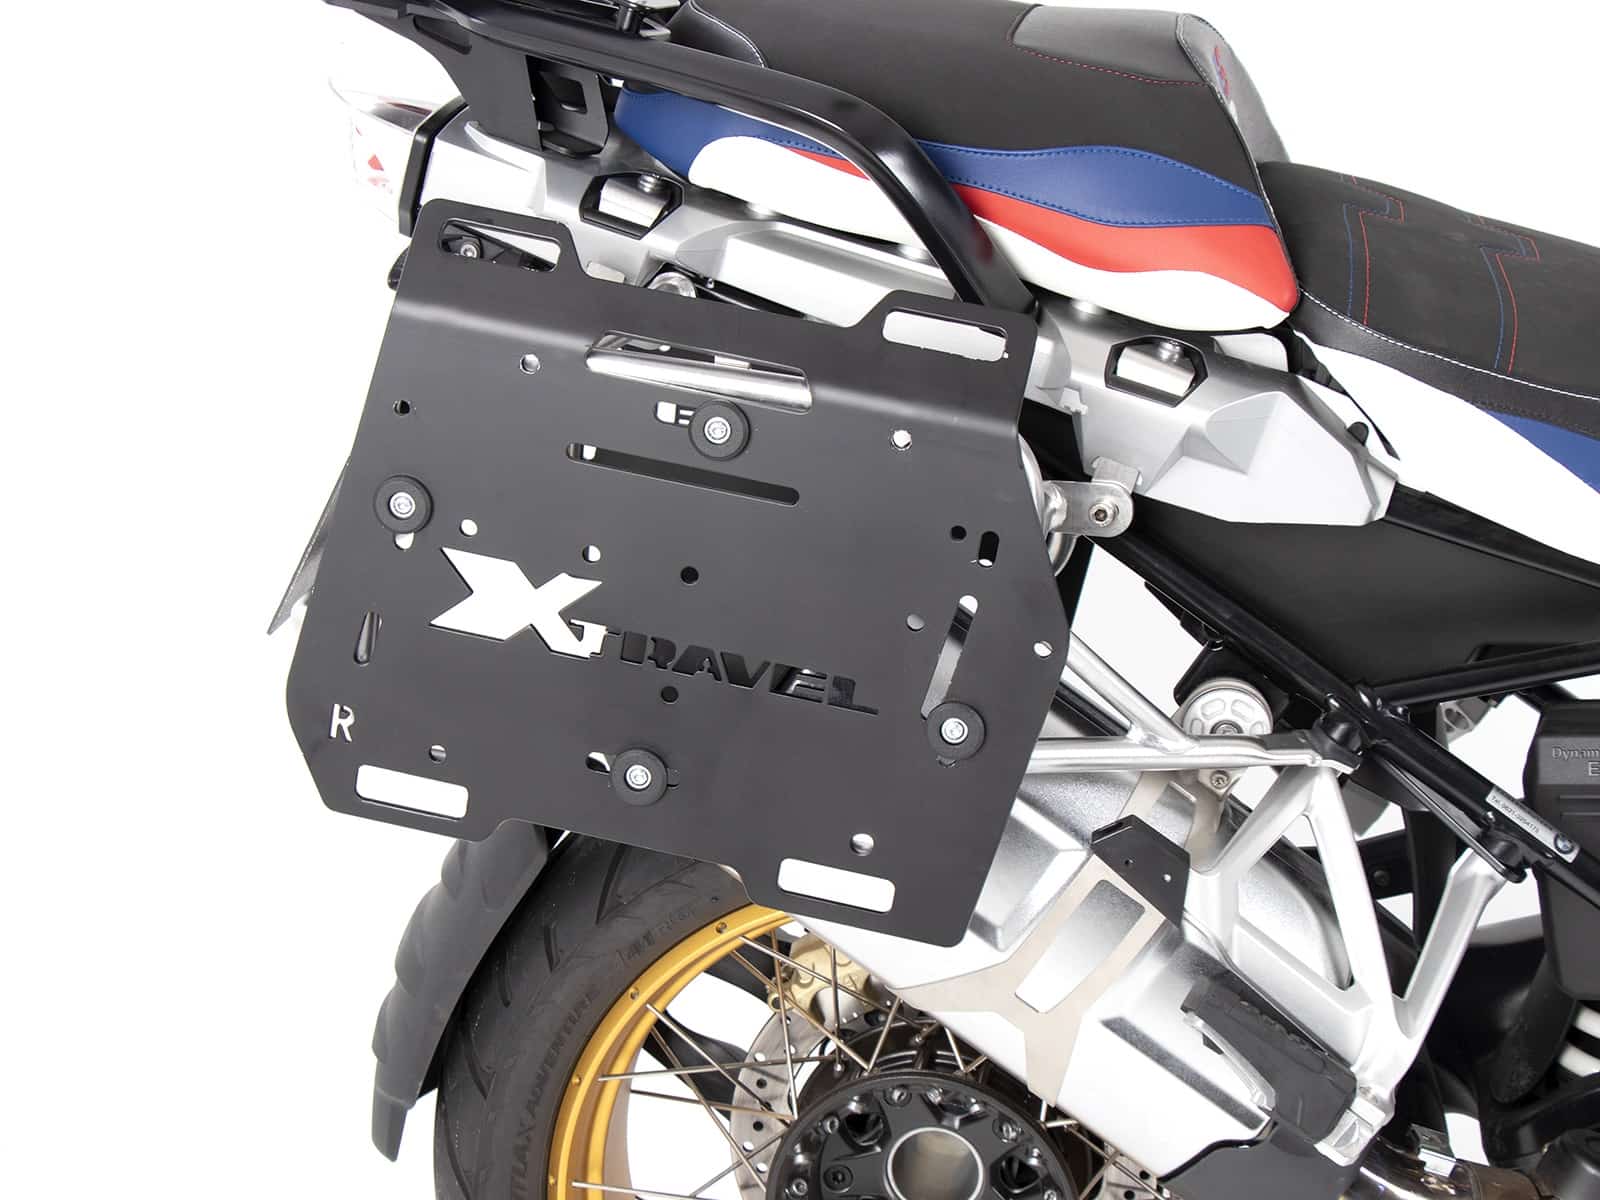 Mounting kit for Xtravel Basic universal holding plates to Touratech sidecase carrier